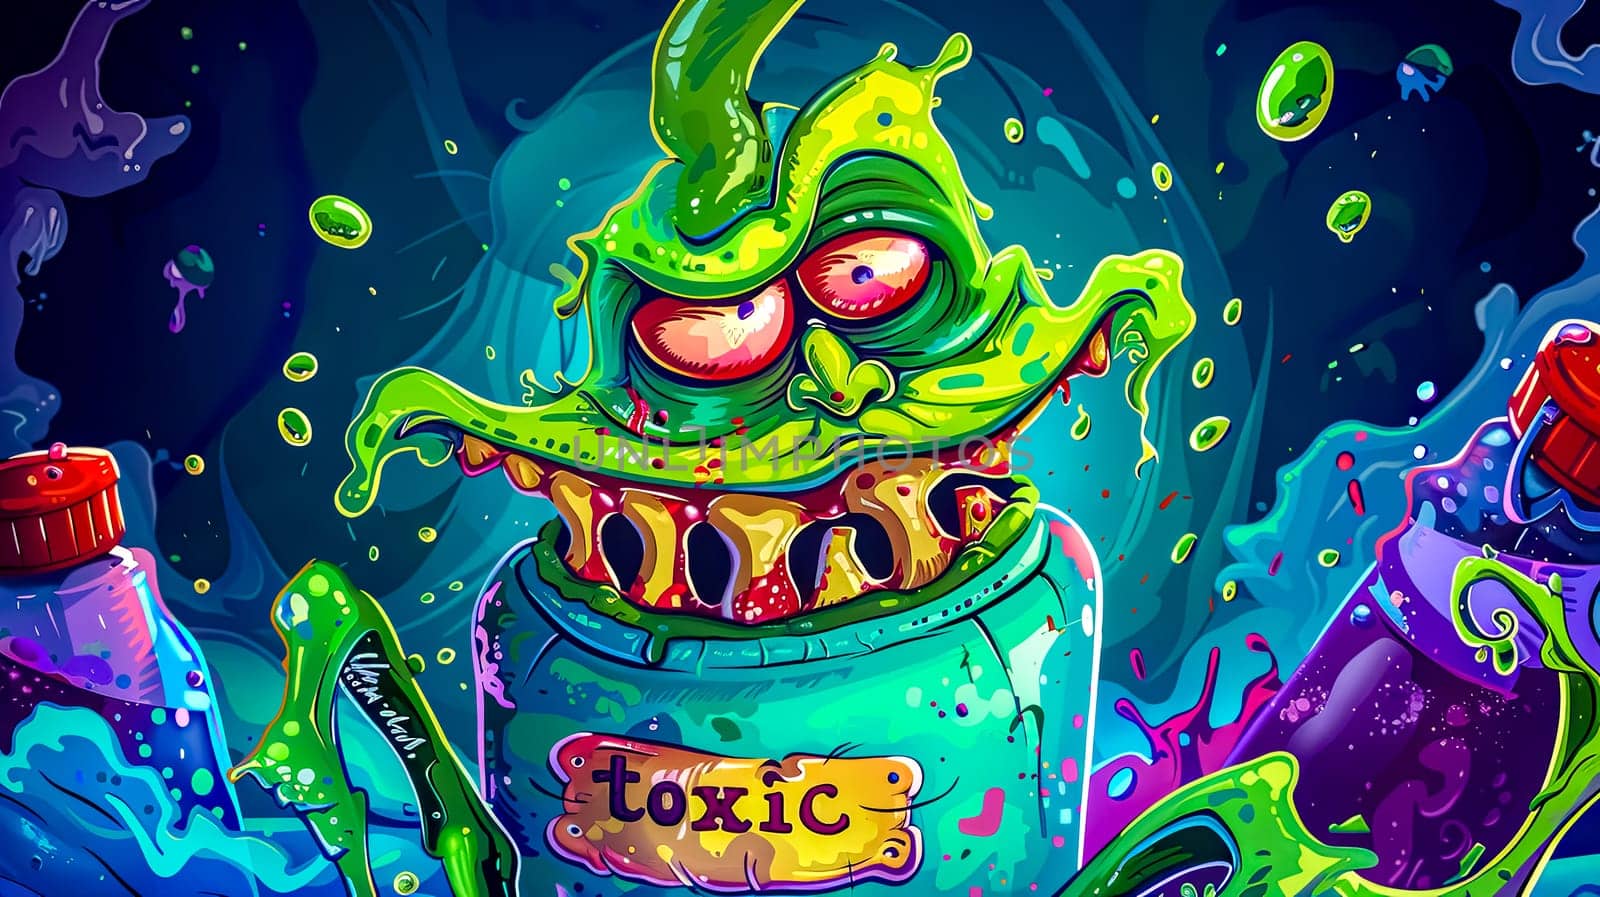 Colorful cartoon toxic slime monster by Edophoto